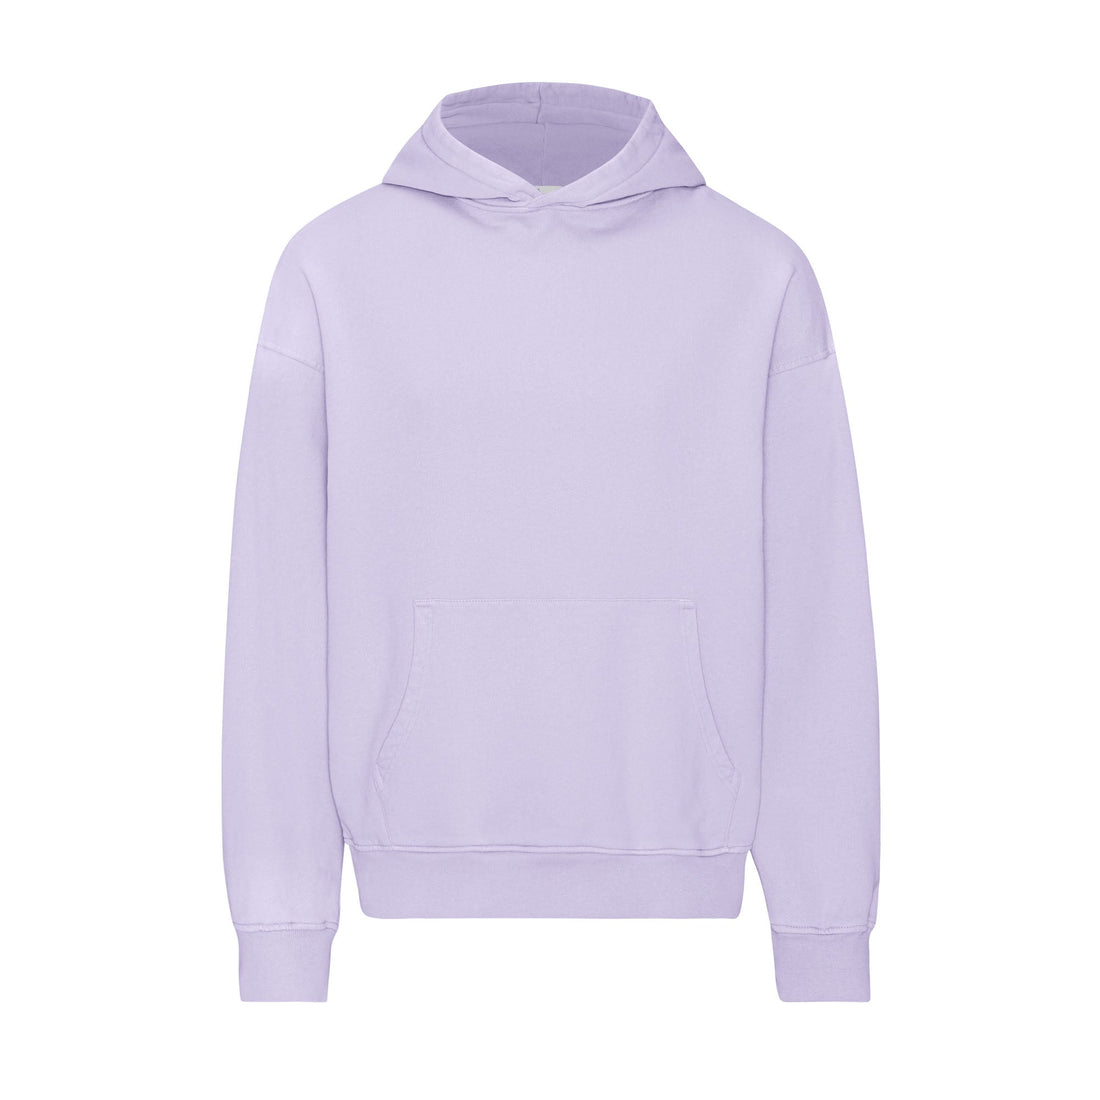 COLORFUL STANDARD • Hoodie Organic Oversized Soft Lavender XS 